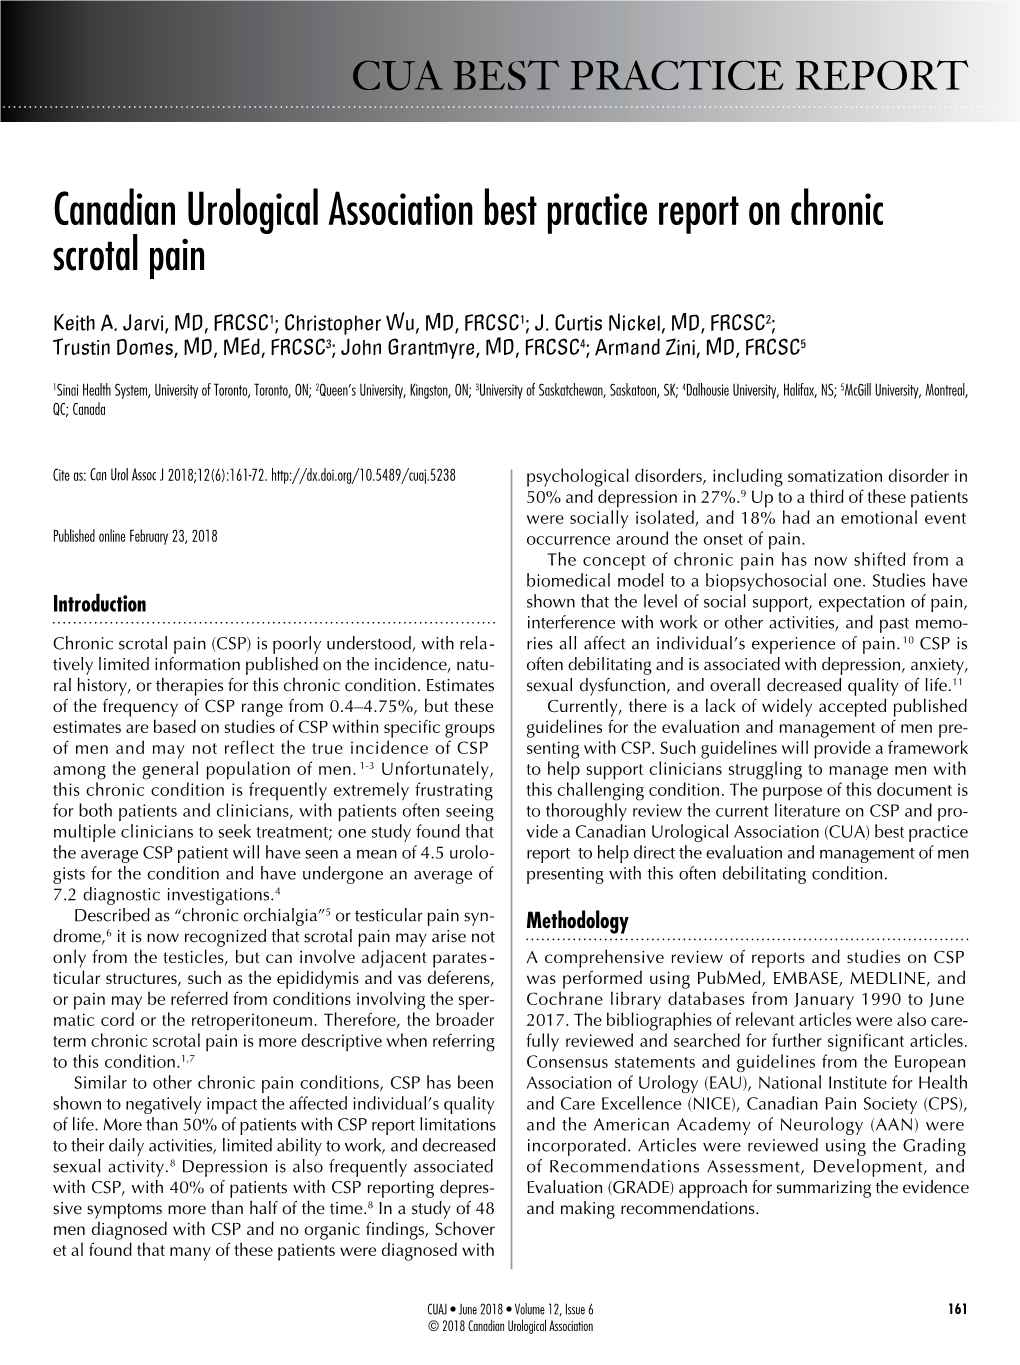 Canadian Urological Association Best Practice Report on Chronic Scrotal Pain